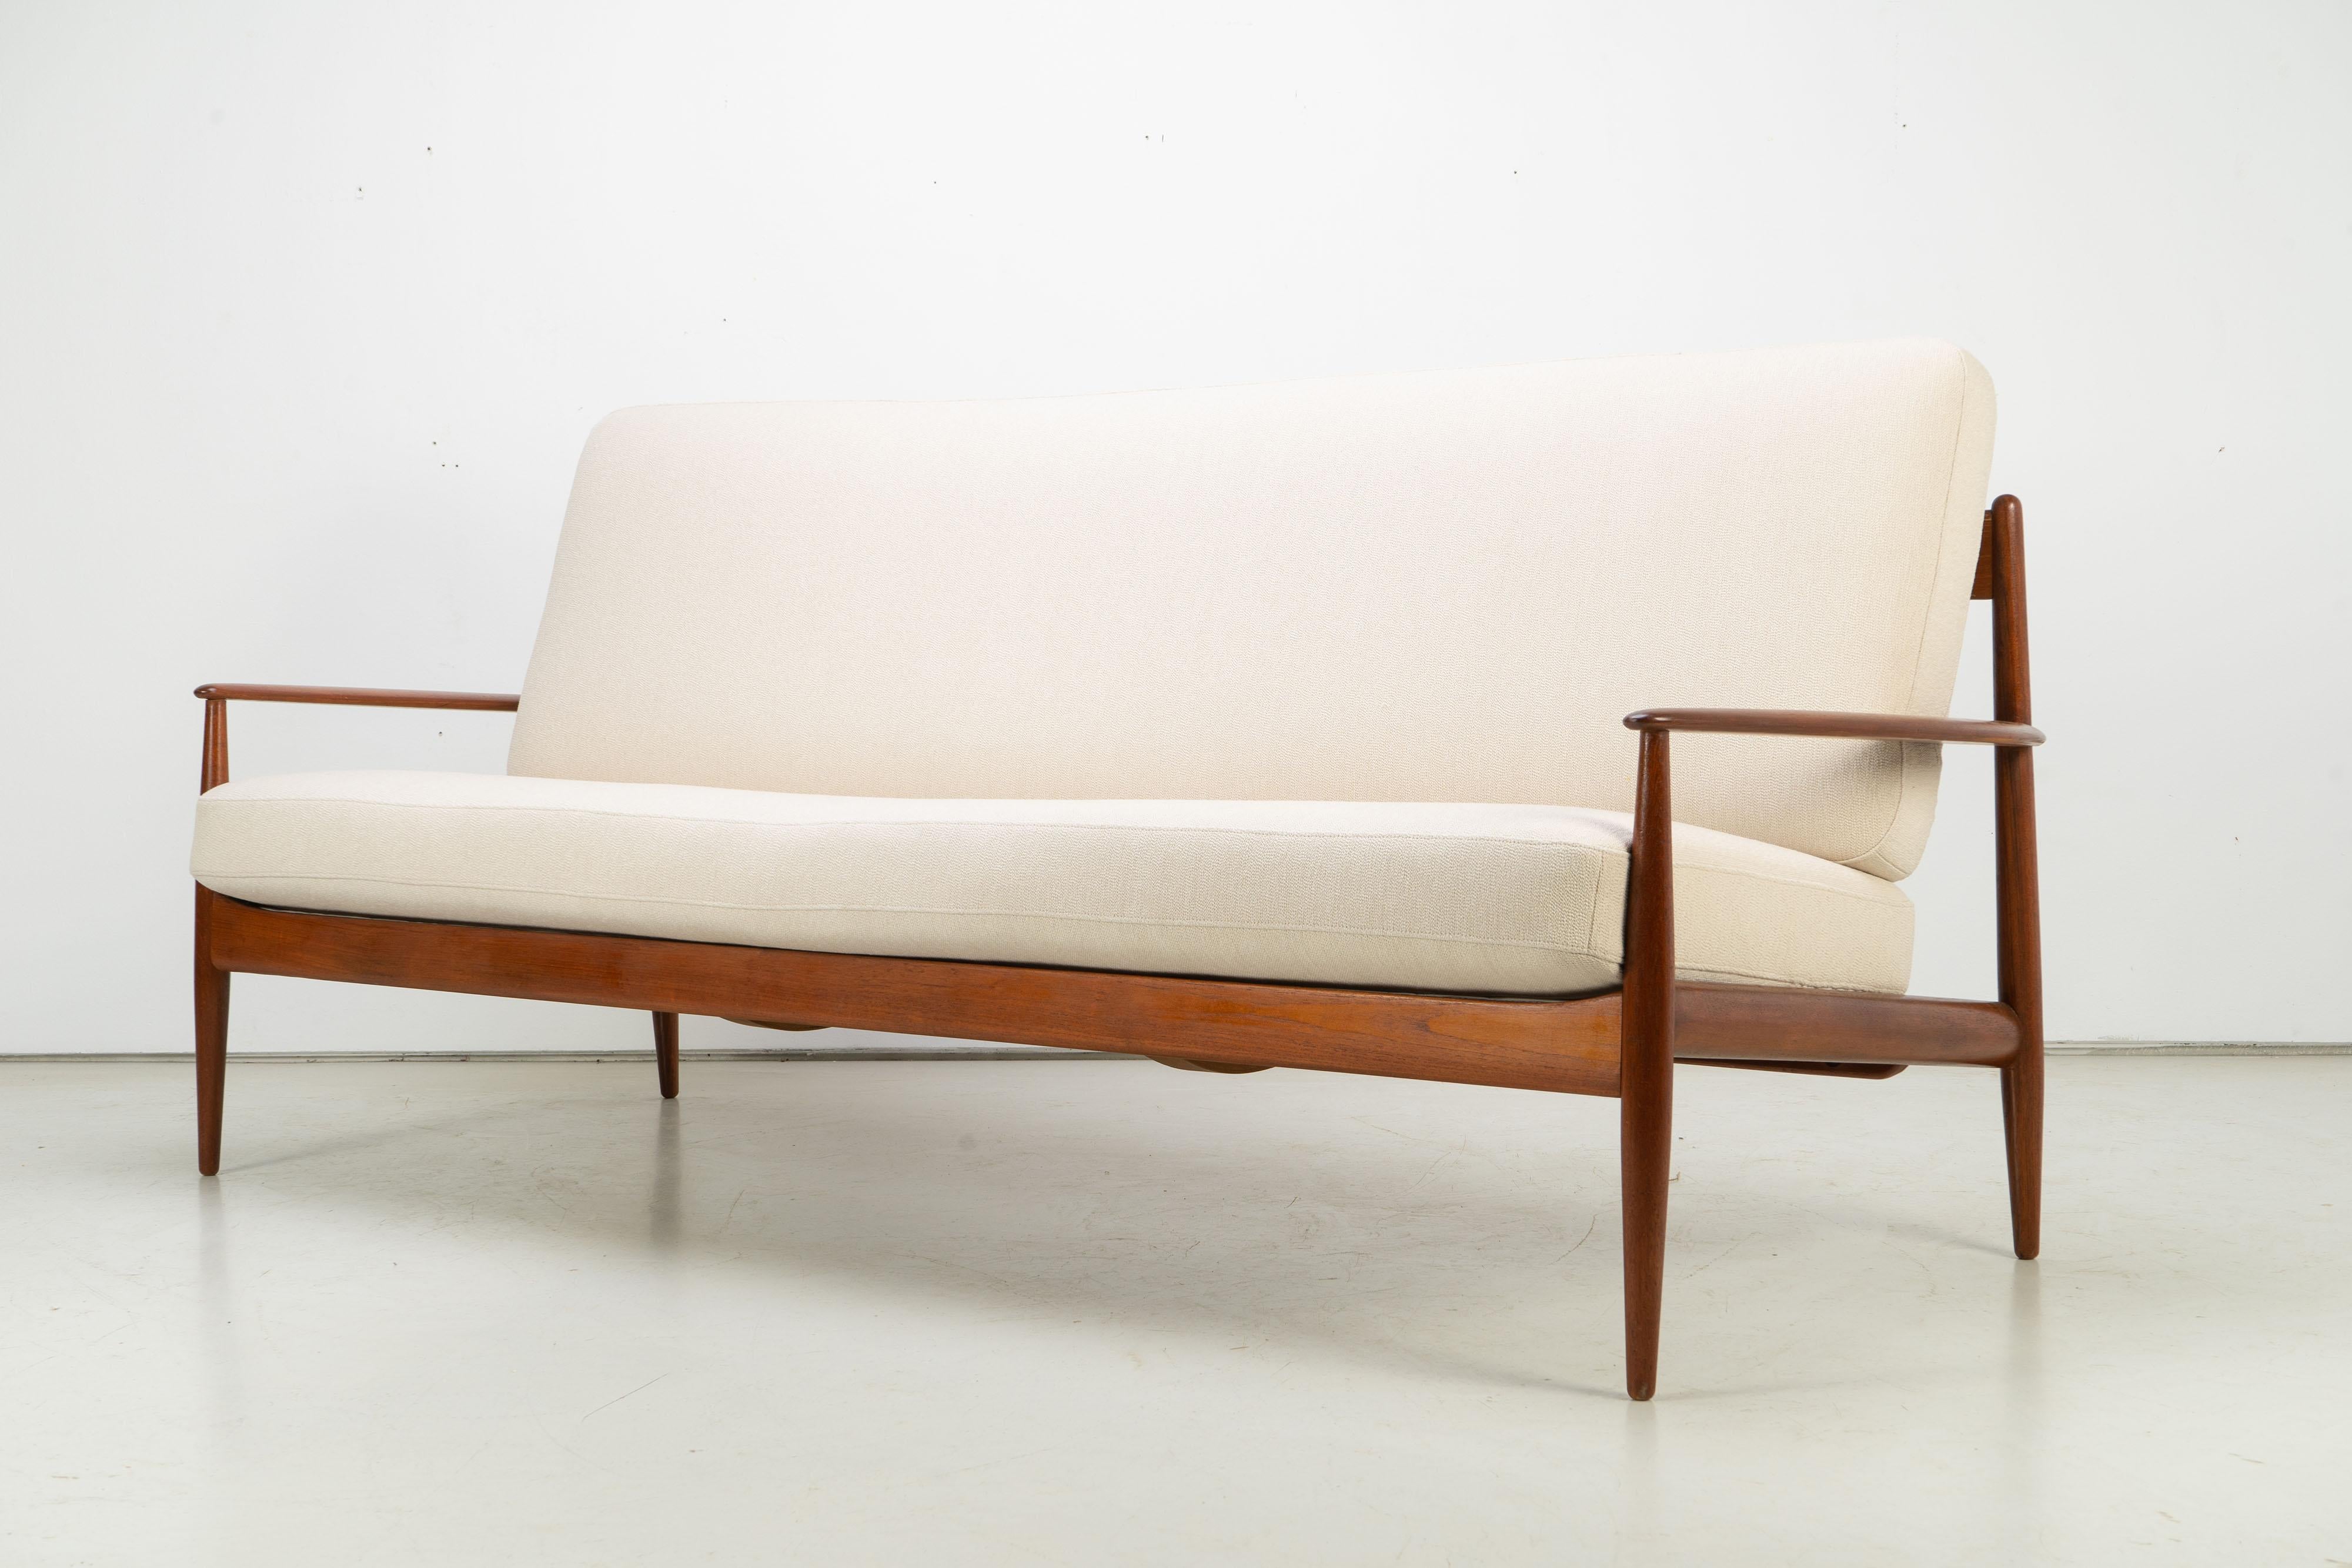 Teak sofa by Grete Jalk, produced by France & Søn in the late 1950s. Newly upholstered and covered with high quality upholstery fabric Arco by Rohi. New upholstery and refinished frame. Labeled on the inside.